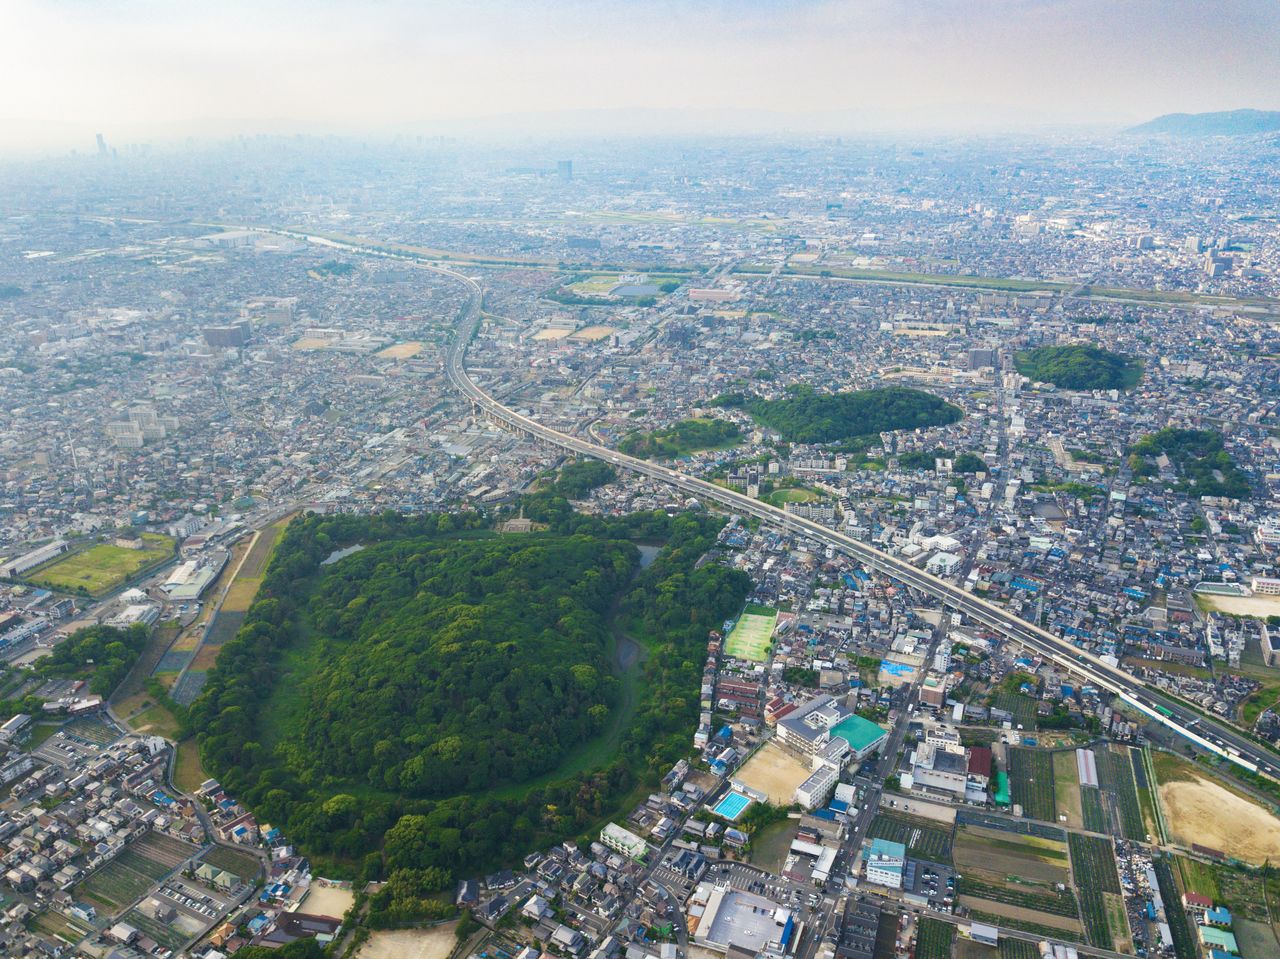 The burial mounds form a “tail” that stretches from the tomb of Emperor Ōjin, in the foreground, to the upper right of the photo.